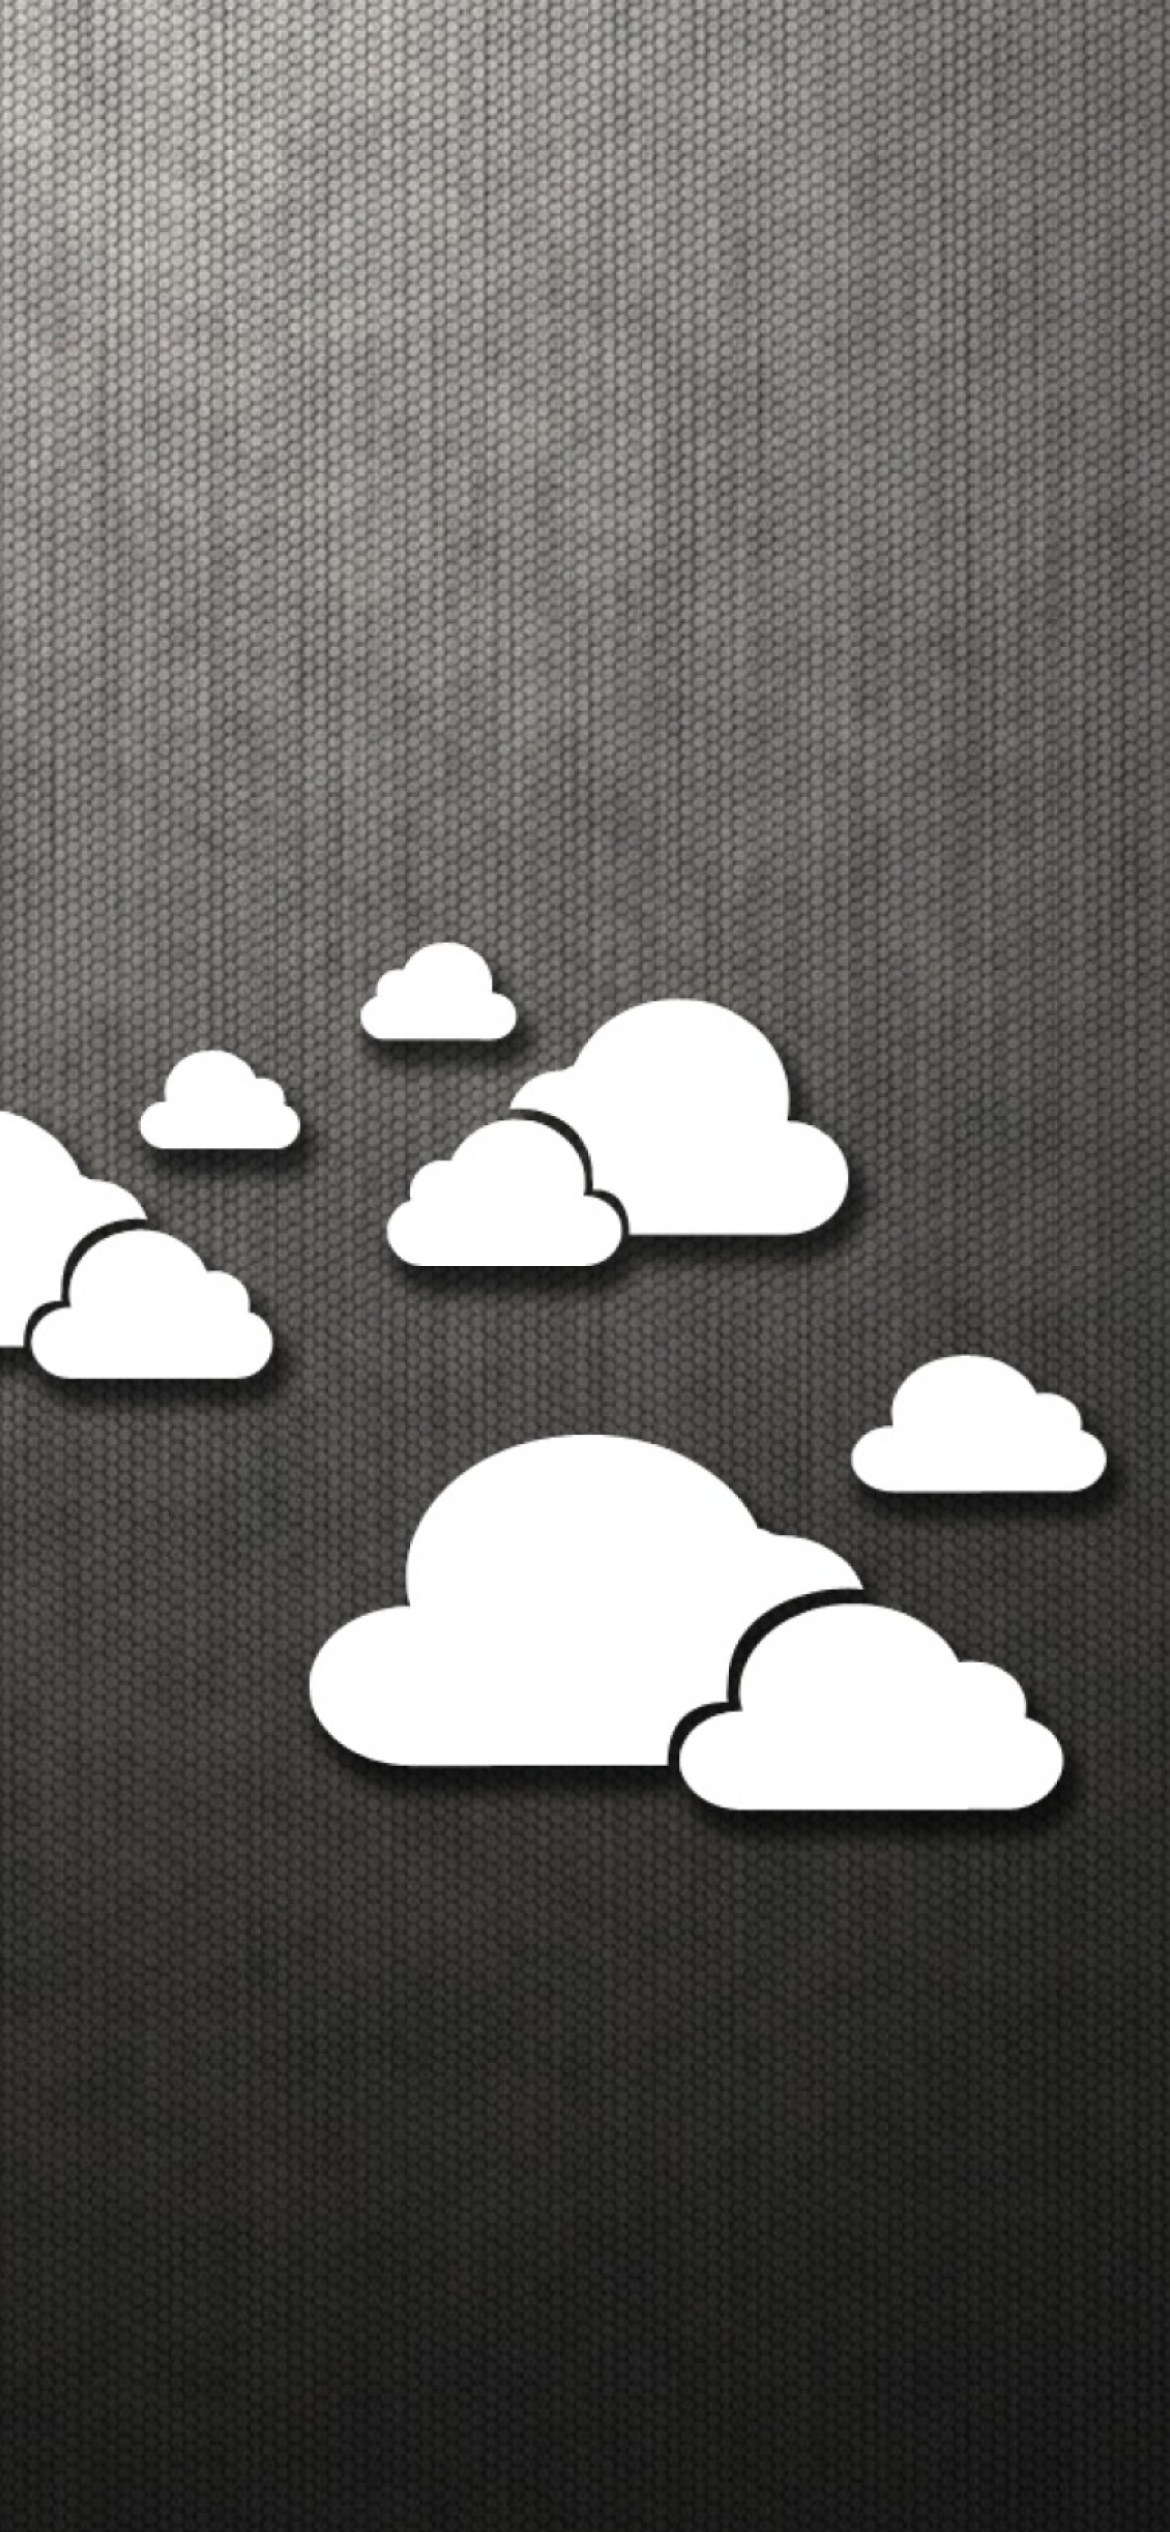 Abstract Clouds wallpaper 1170x2532